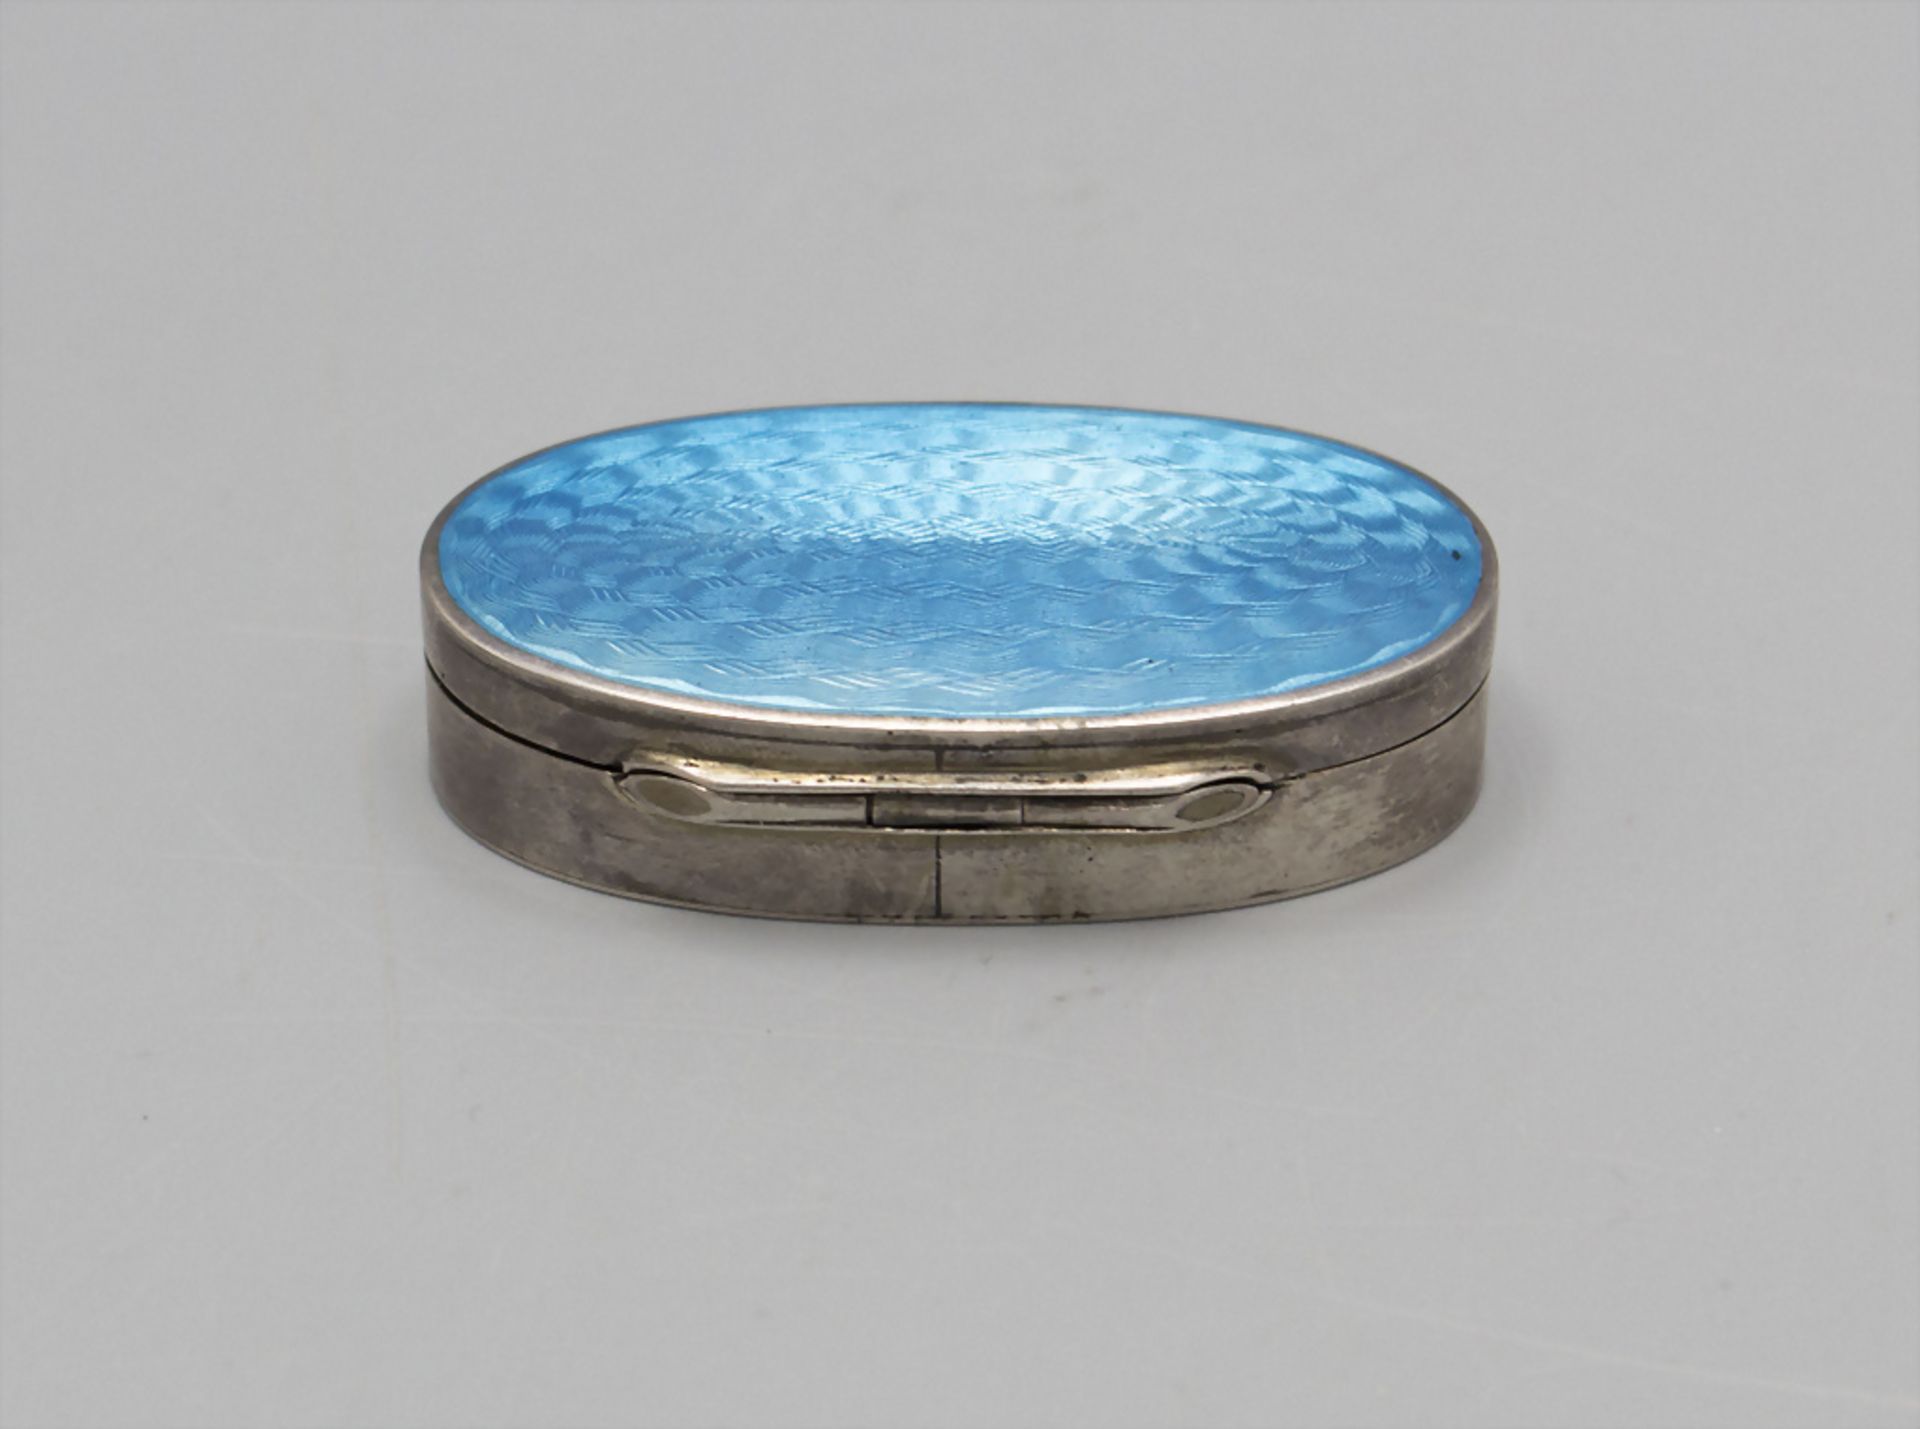 Kleine Tabatiere mit Emaille / A snuff box with enamel, um 1900 - Image 4 of 8